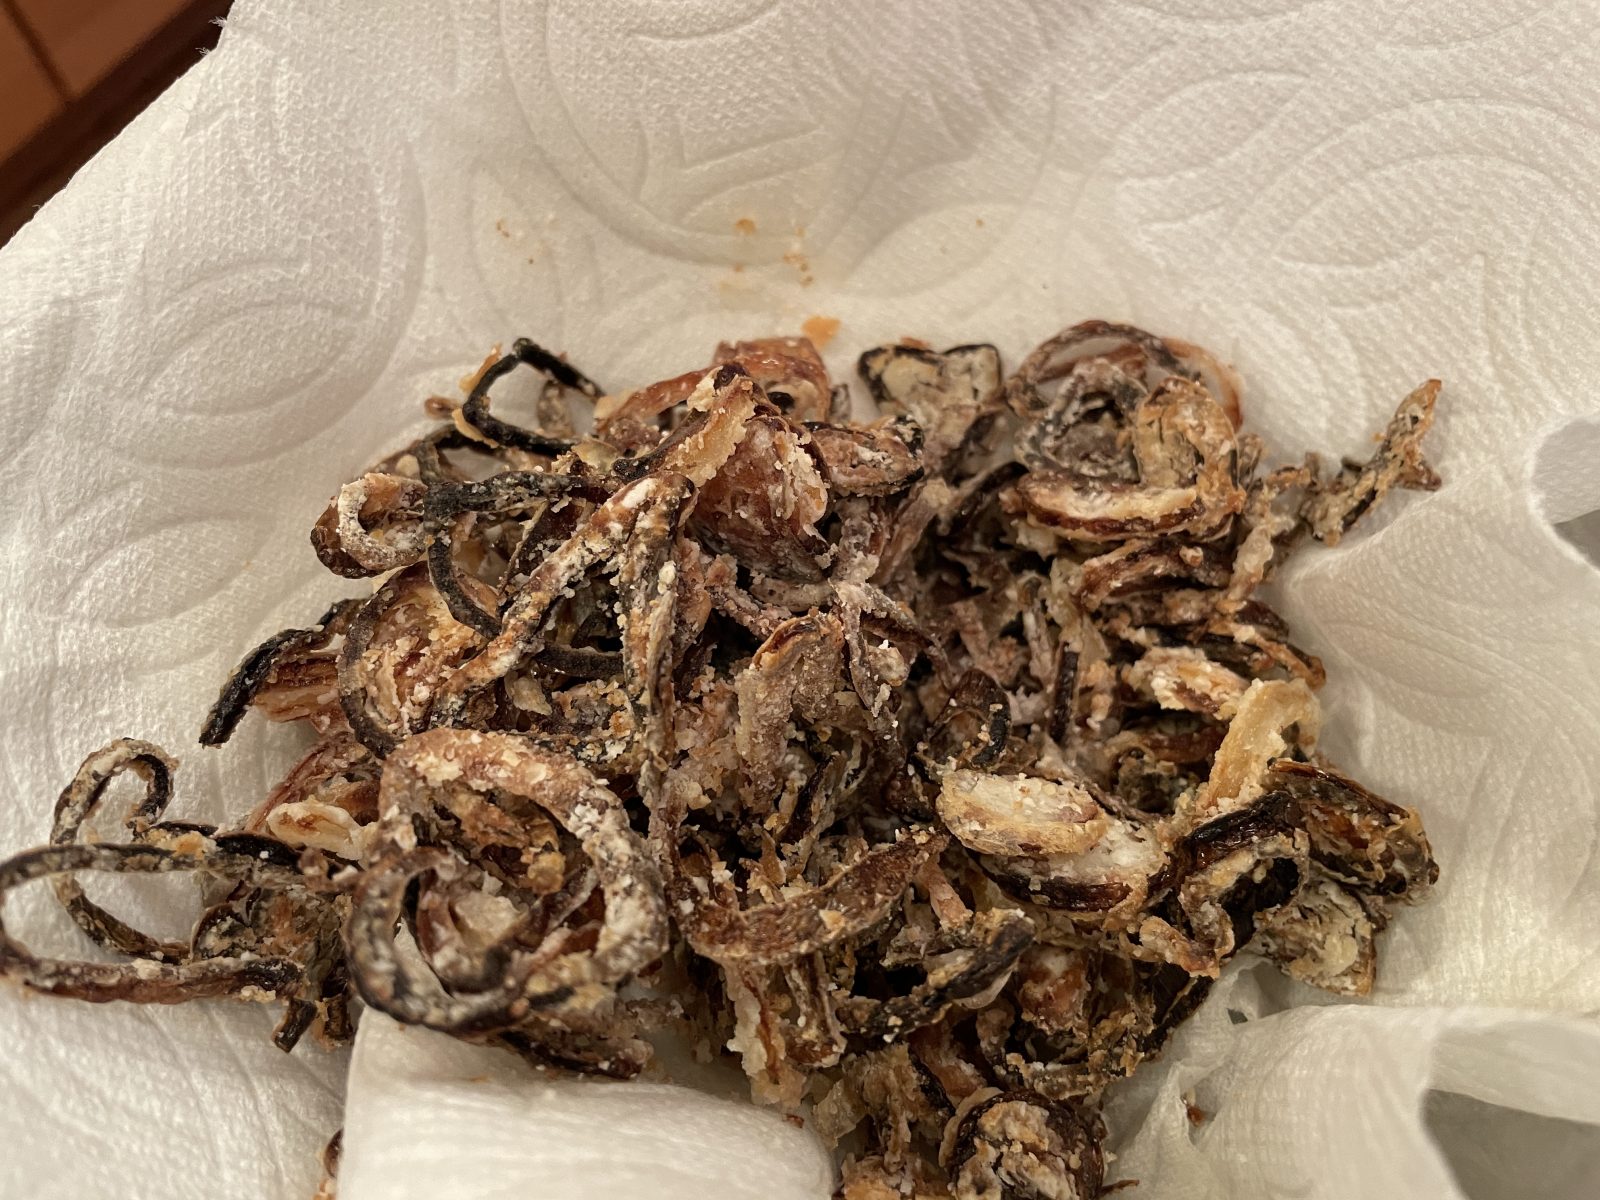 Fried shallots. After peeling then slicing the shallots, the individual rings are run through corn starch or flour to remove moisture. Fry for about 4-5 minutes at 325F until brown.